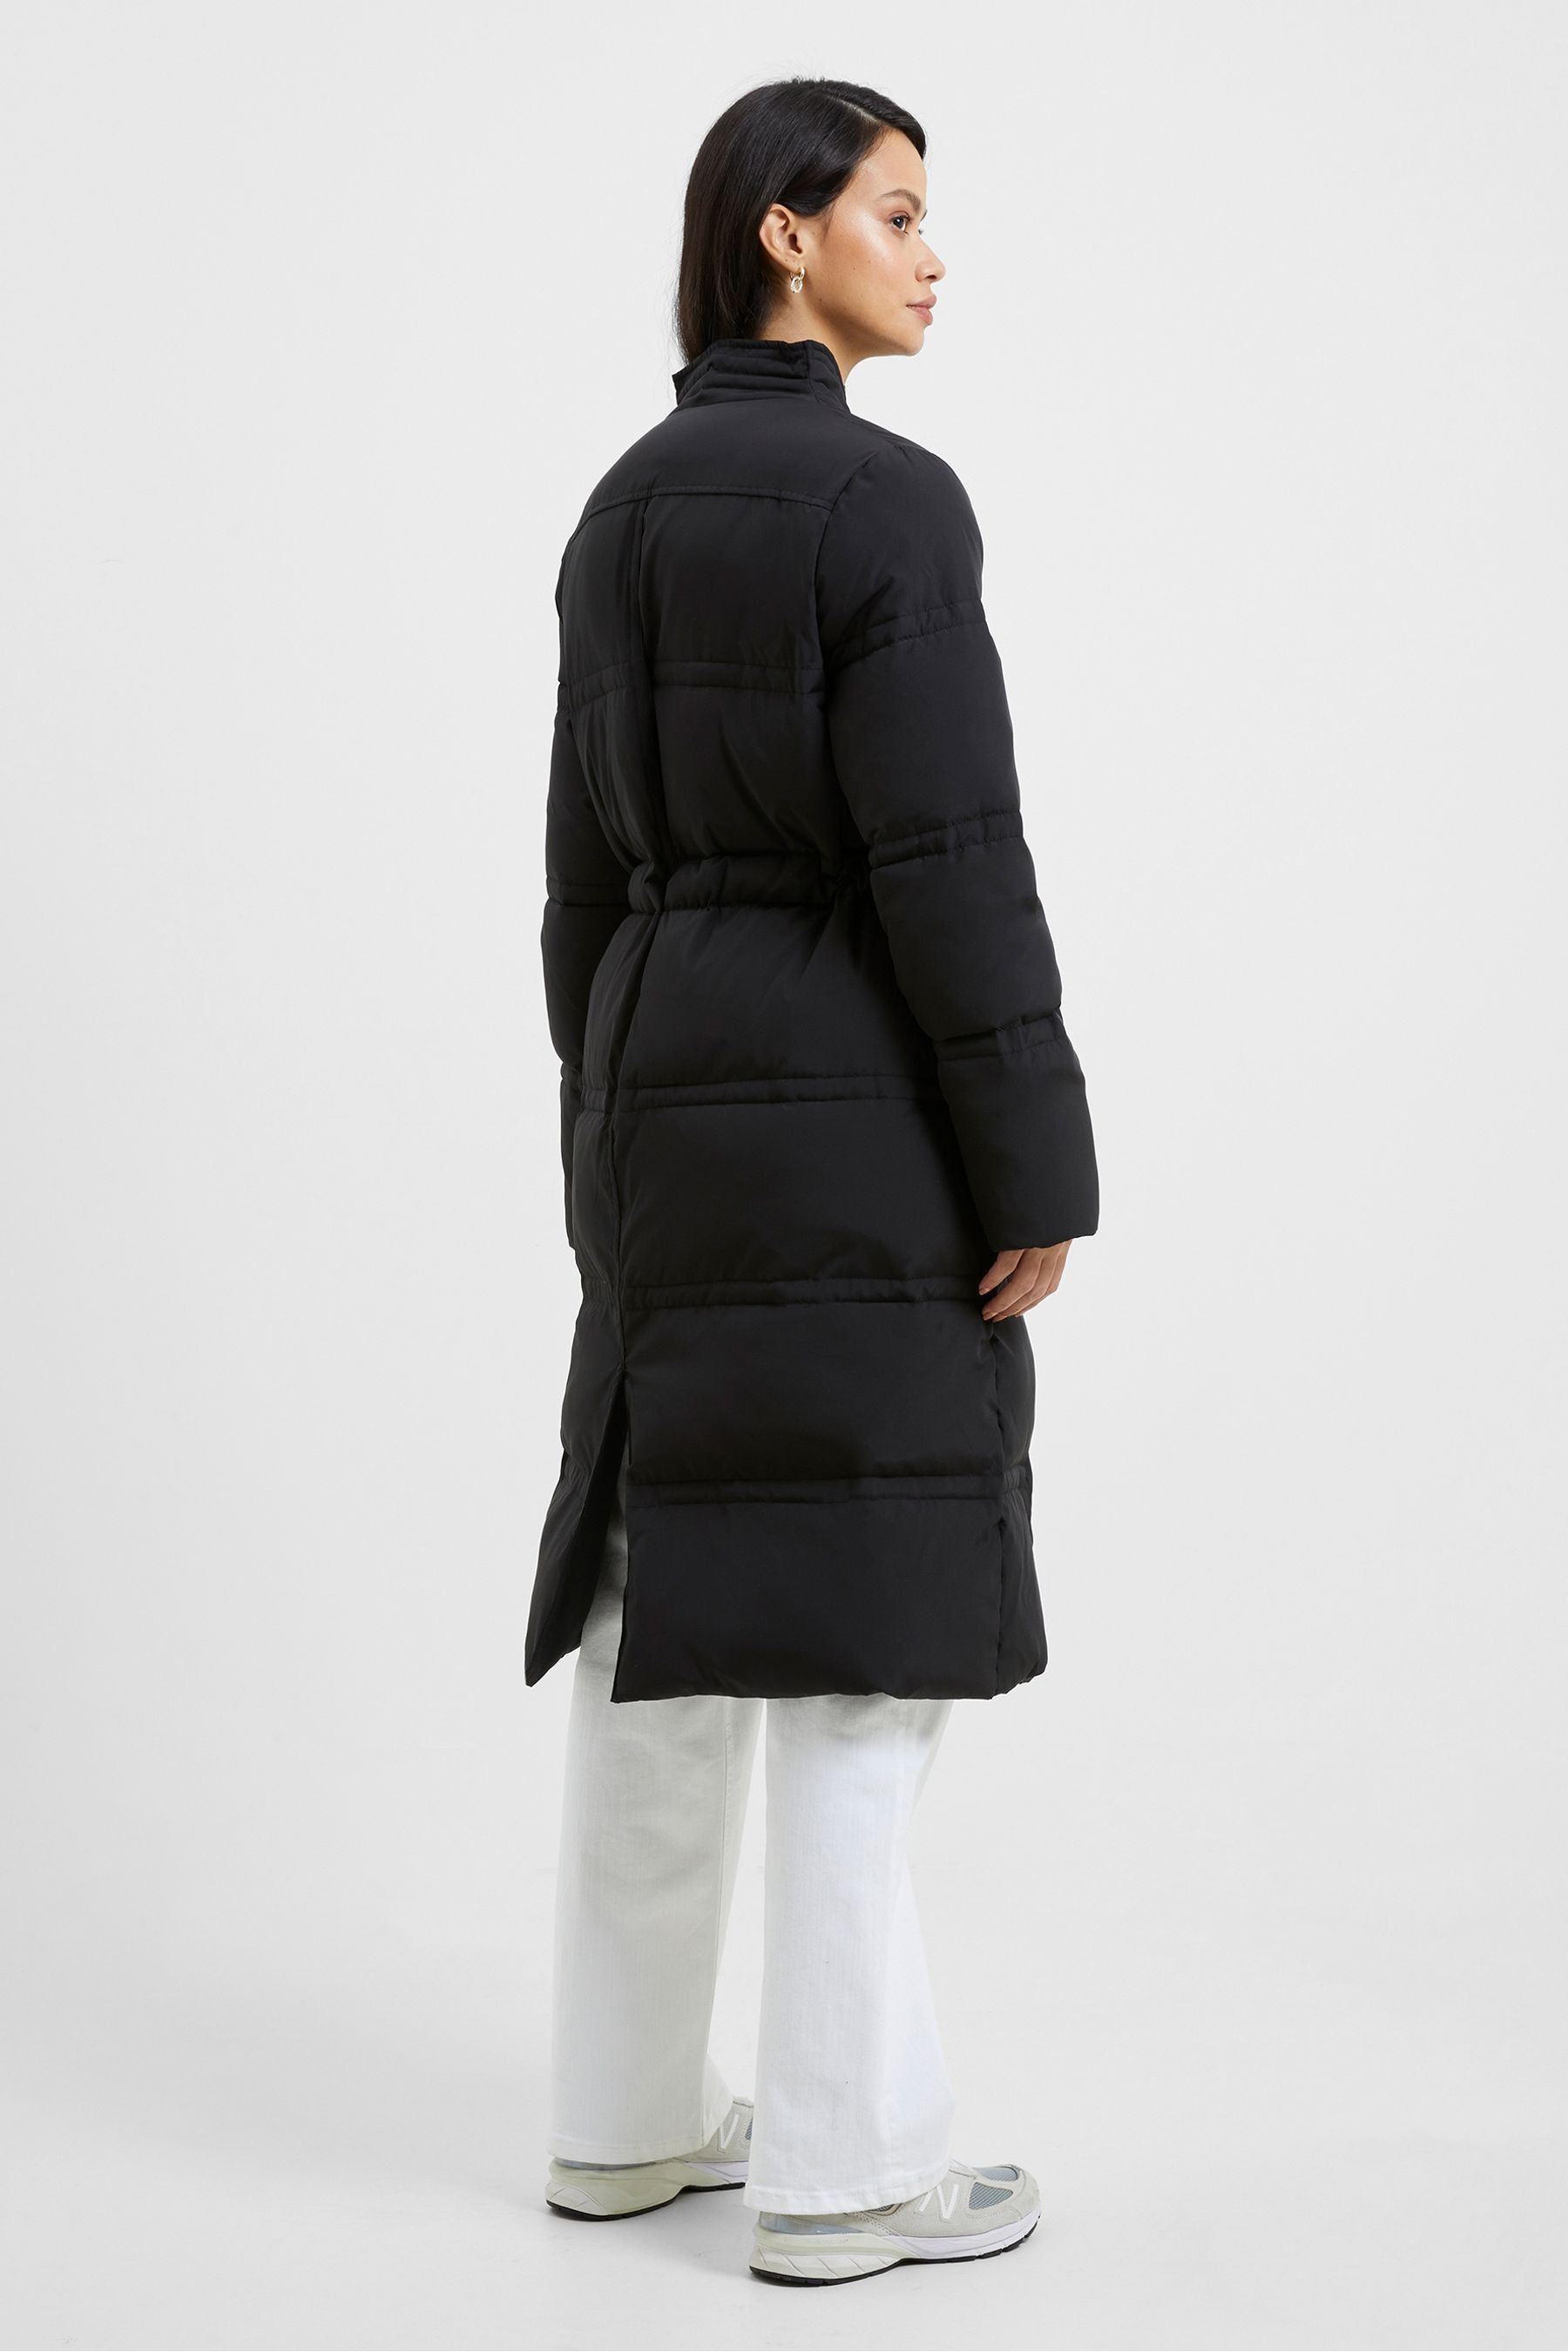 Buy French Connection Auden Coat from the Next UK online shop